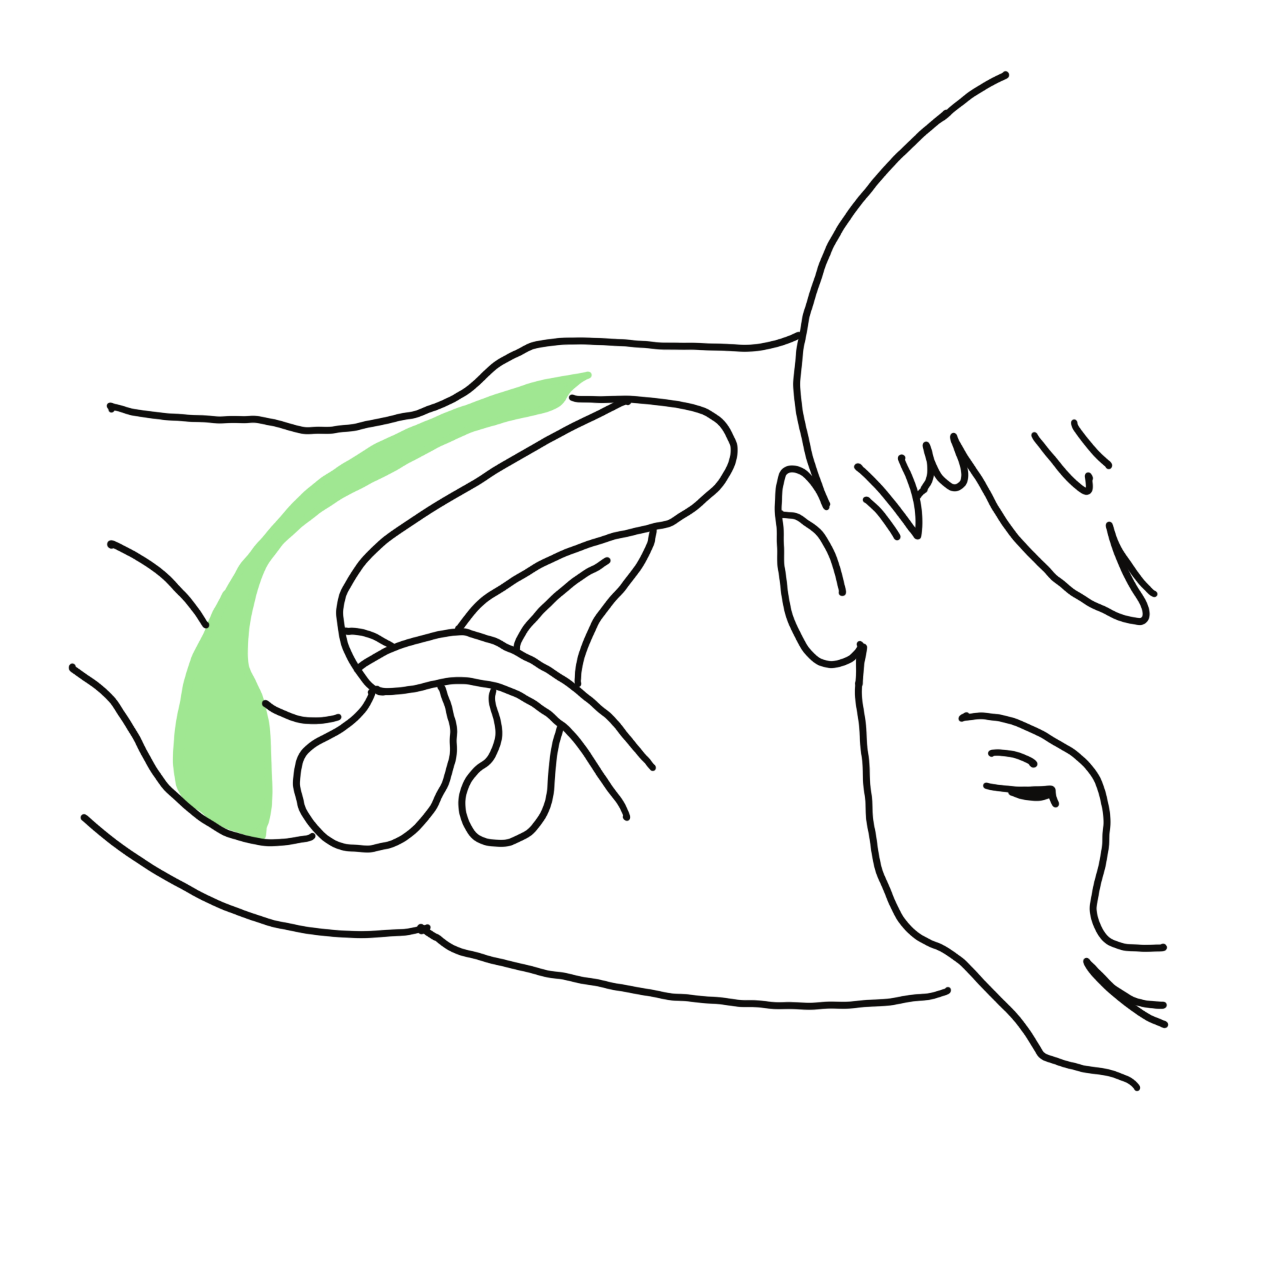 Infraspinatus muscle in shoulder joint